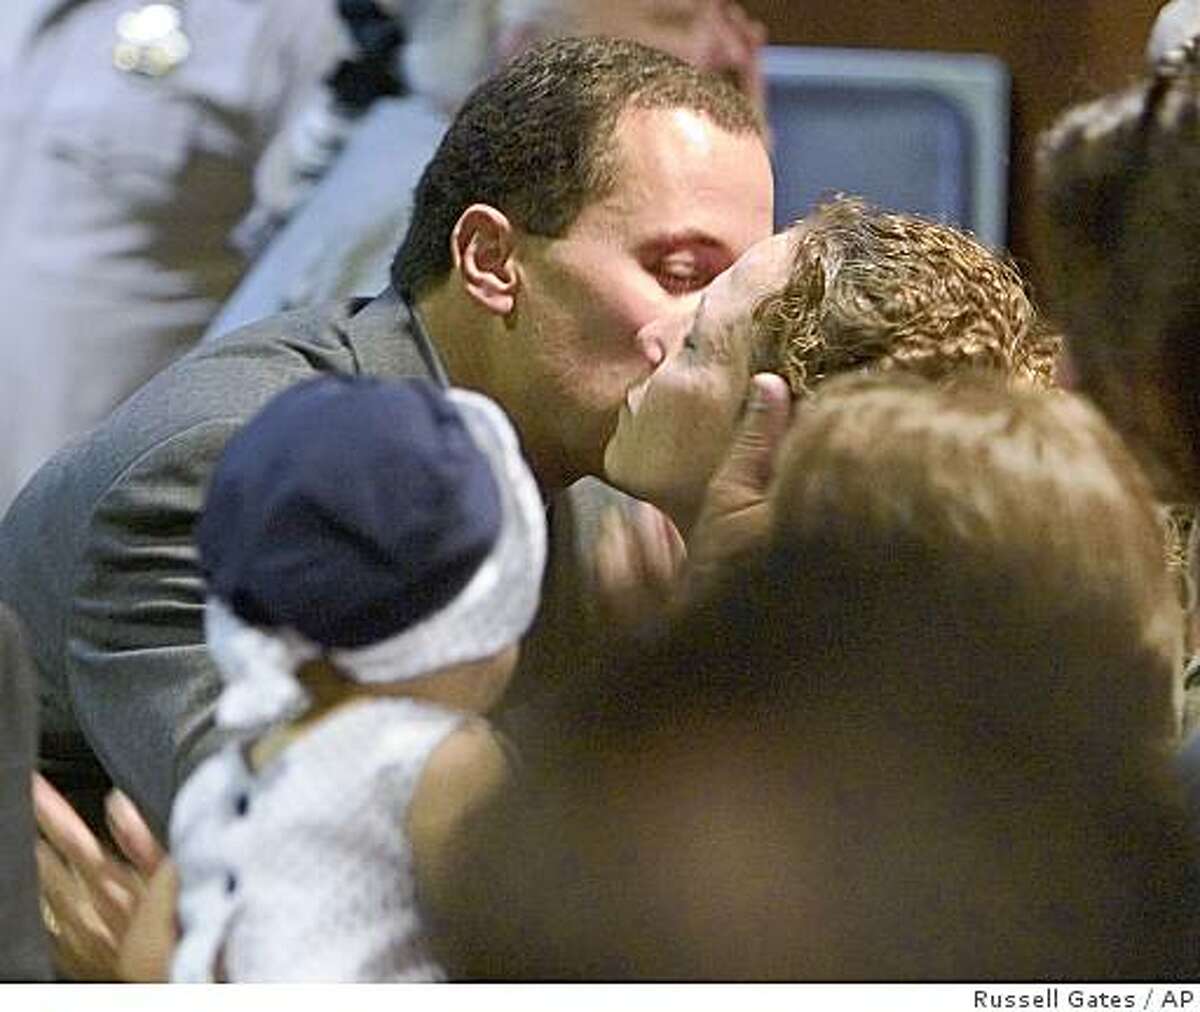 Former Chandler police Officer Dan Lovelace turns around and kisses his wife, Trish Lovelace, after he was acquitted Friday, July 9, 2004, in Mesa, Ariz., of second-degree murder and endangerment charges in shooting death of an Ahwatukee woman. (AP Photo/Pool, Russell Gates)